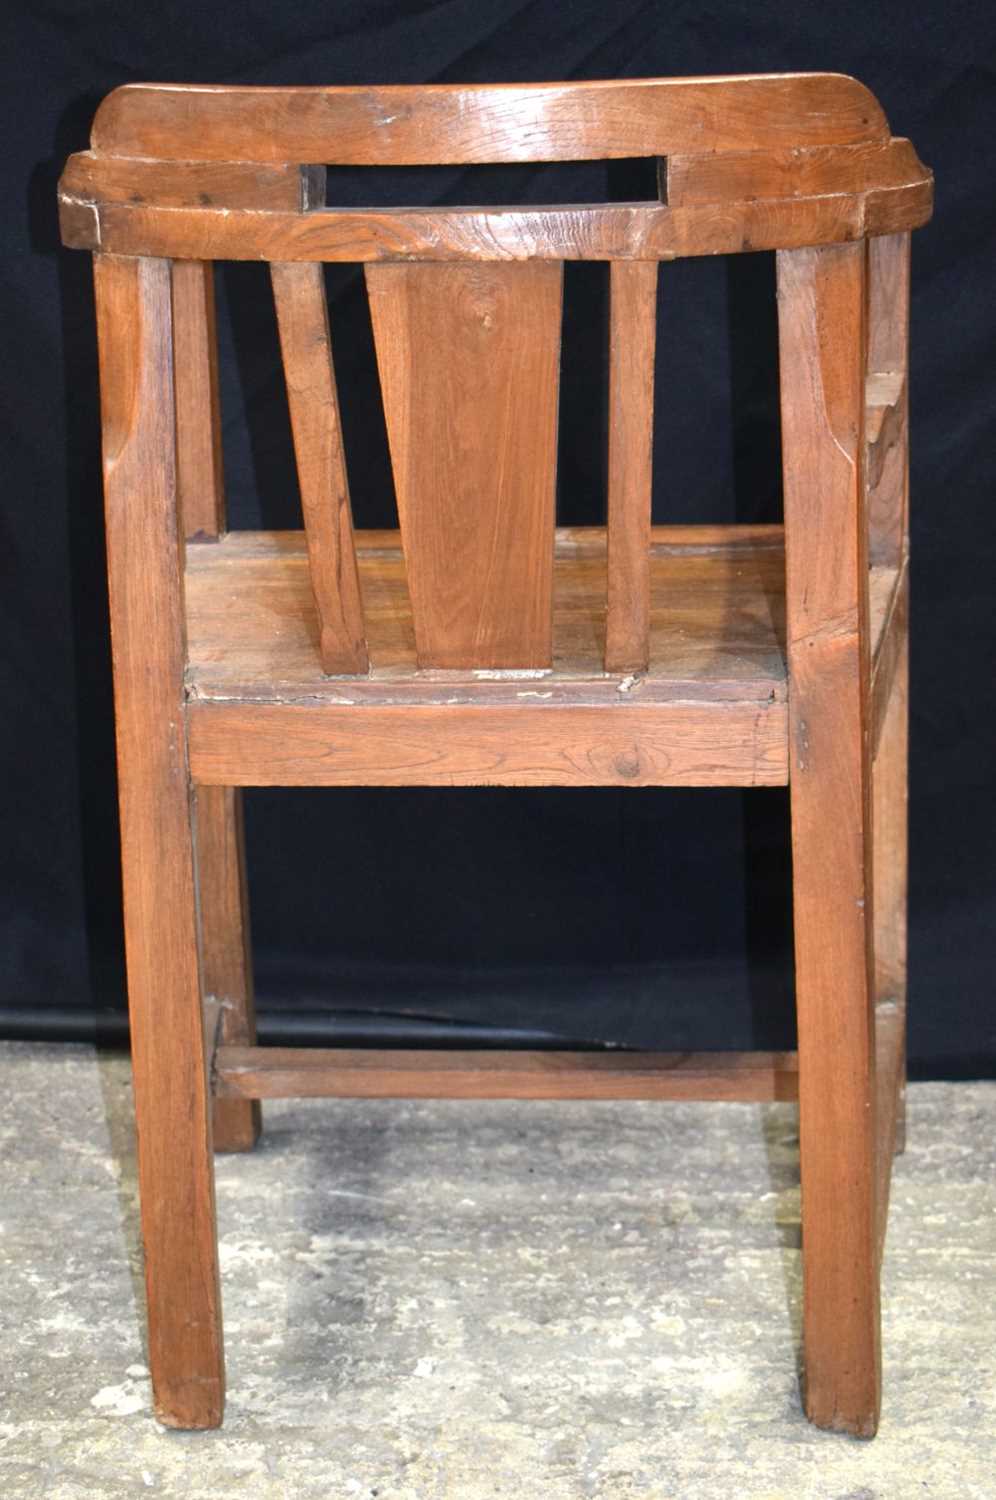 An Indian teak chair 78 x 51 cm - Image 4 of 8